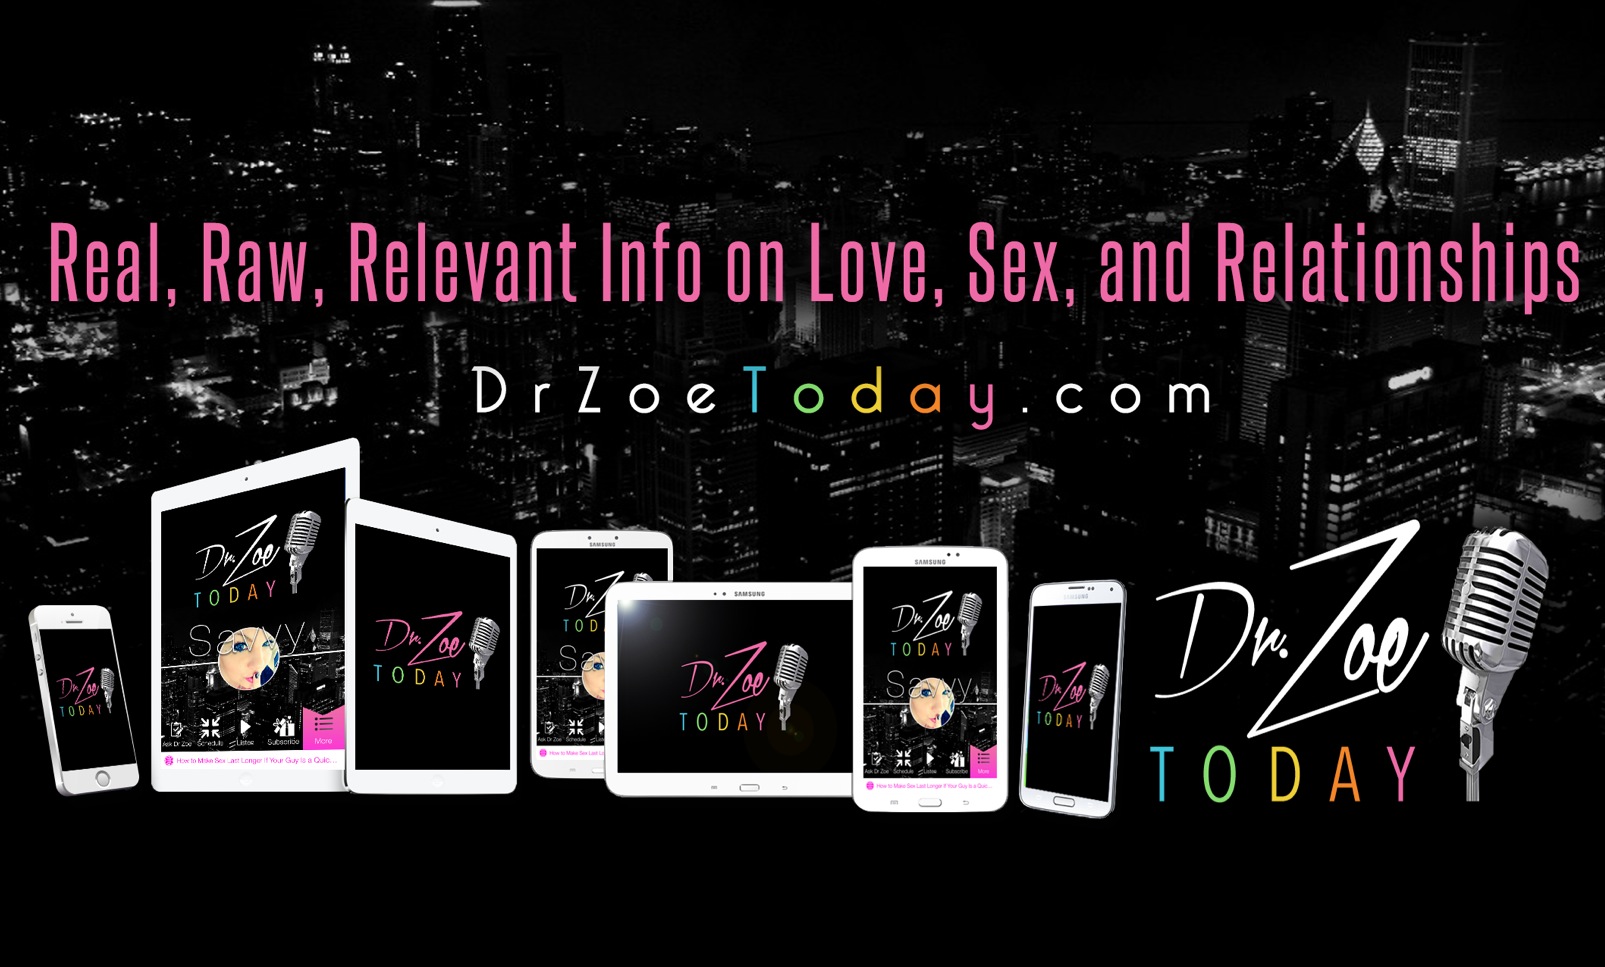 Dr. Zoe Today – Another Month of Real, Raw & Relevant Episodes